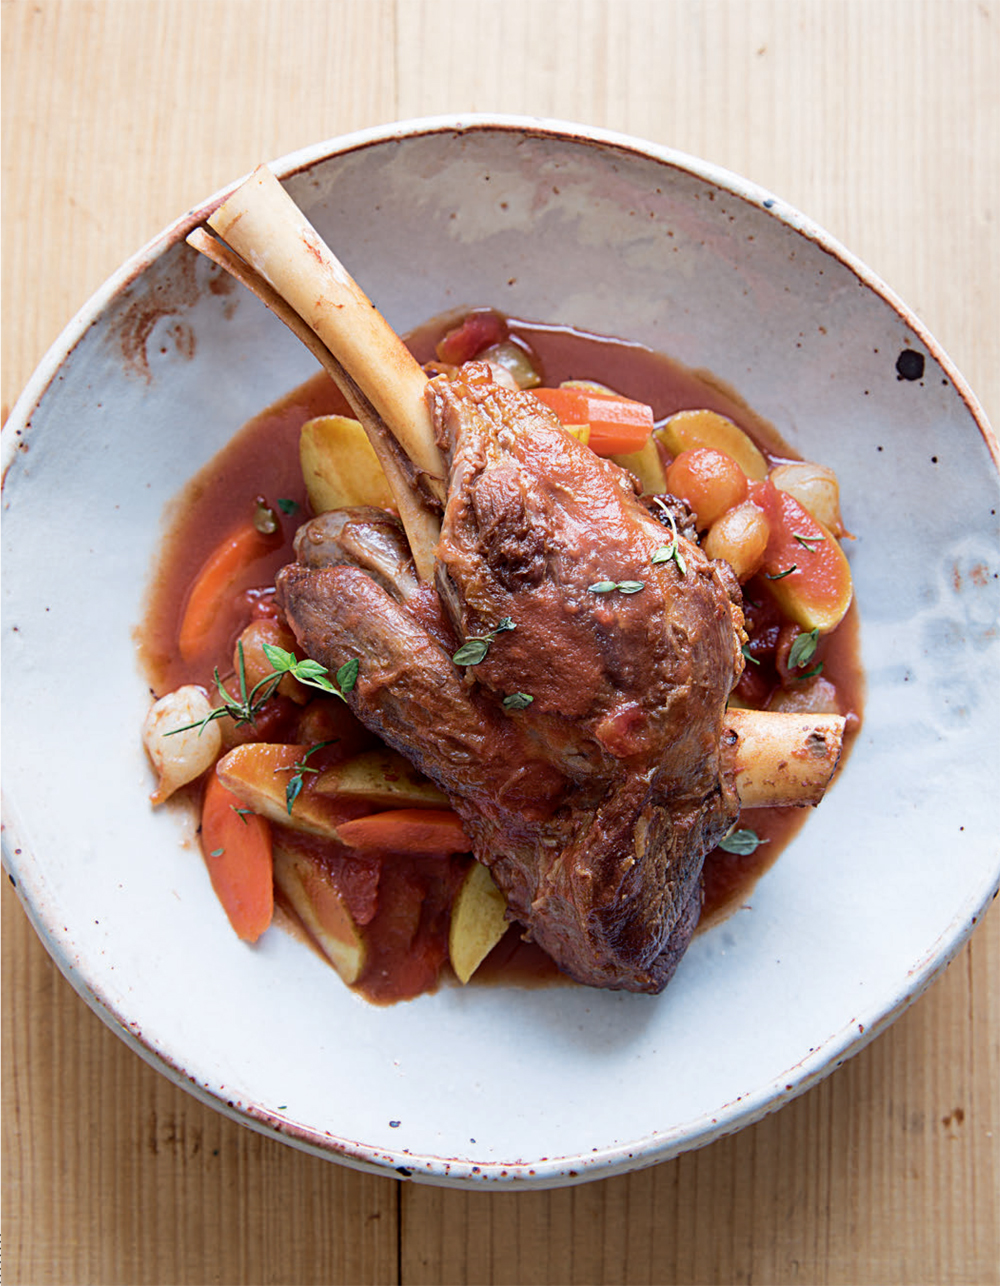 Braised lamb shanks with vegetables recipe